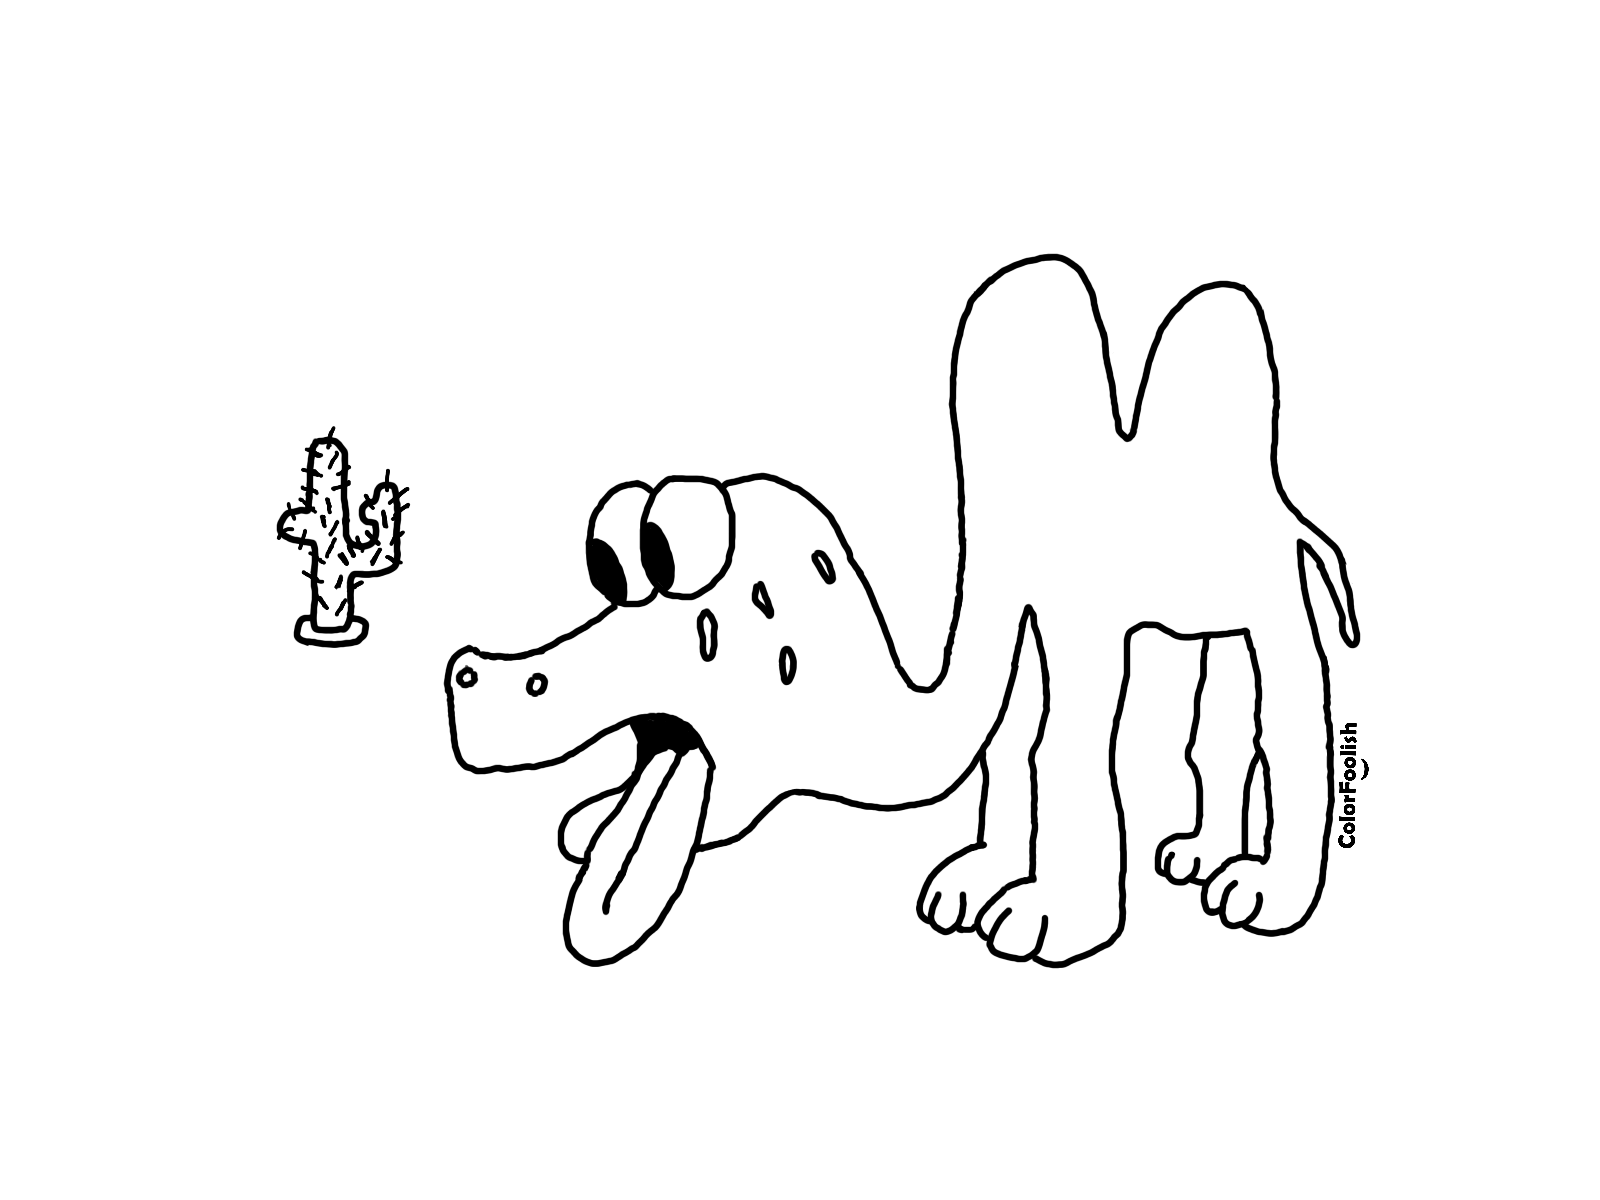 Coloring page of a camel with thirst